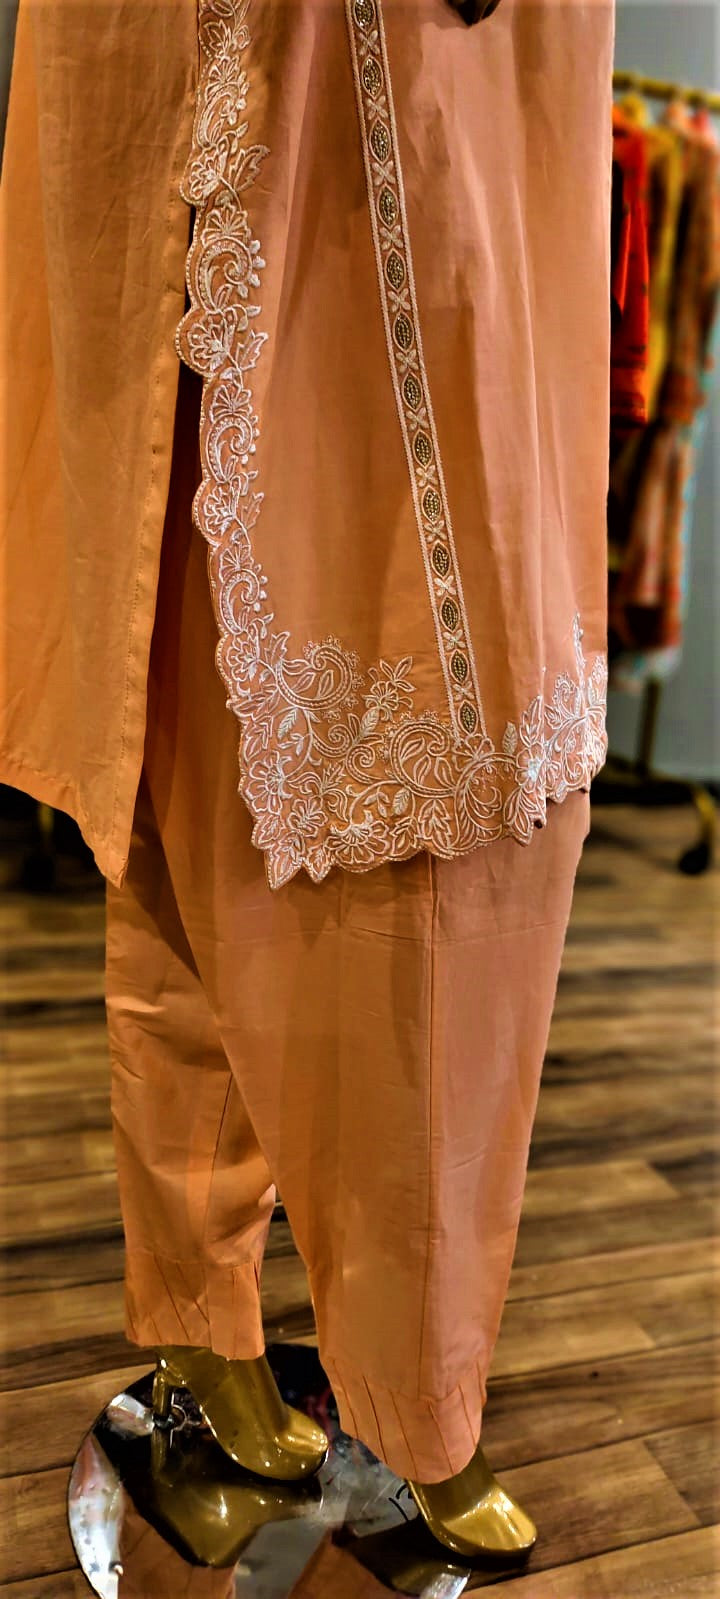 Ready to Wear- 3 Piece -Pink Colour Lawn ,  Embroidery Shirt (Neck, Sleeves, Daman) - Lawn Trousers & Net Embroidery  Dupatta.